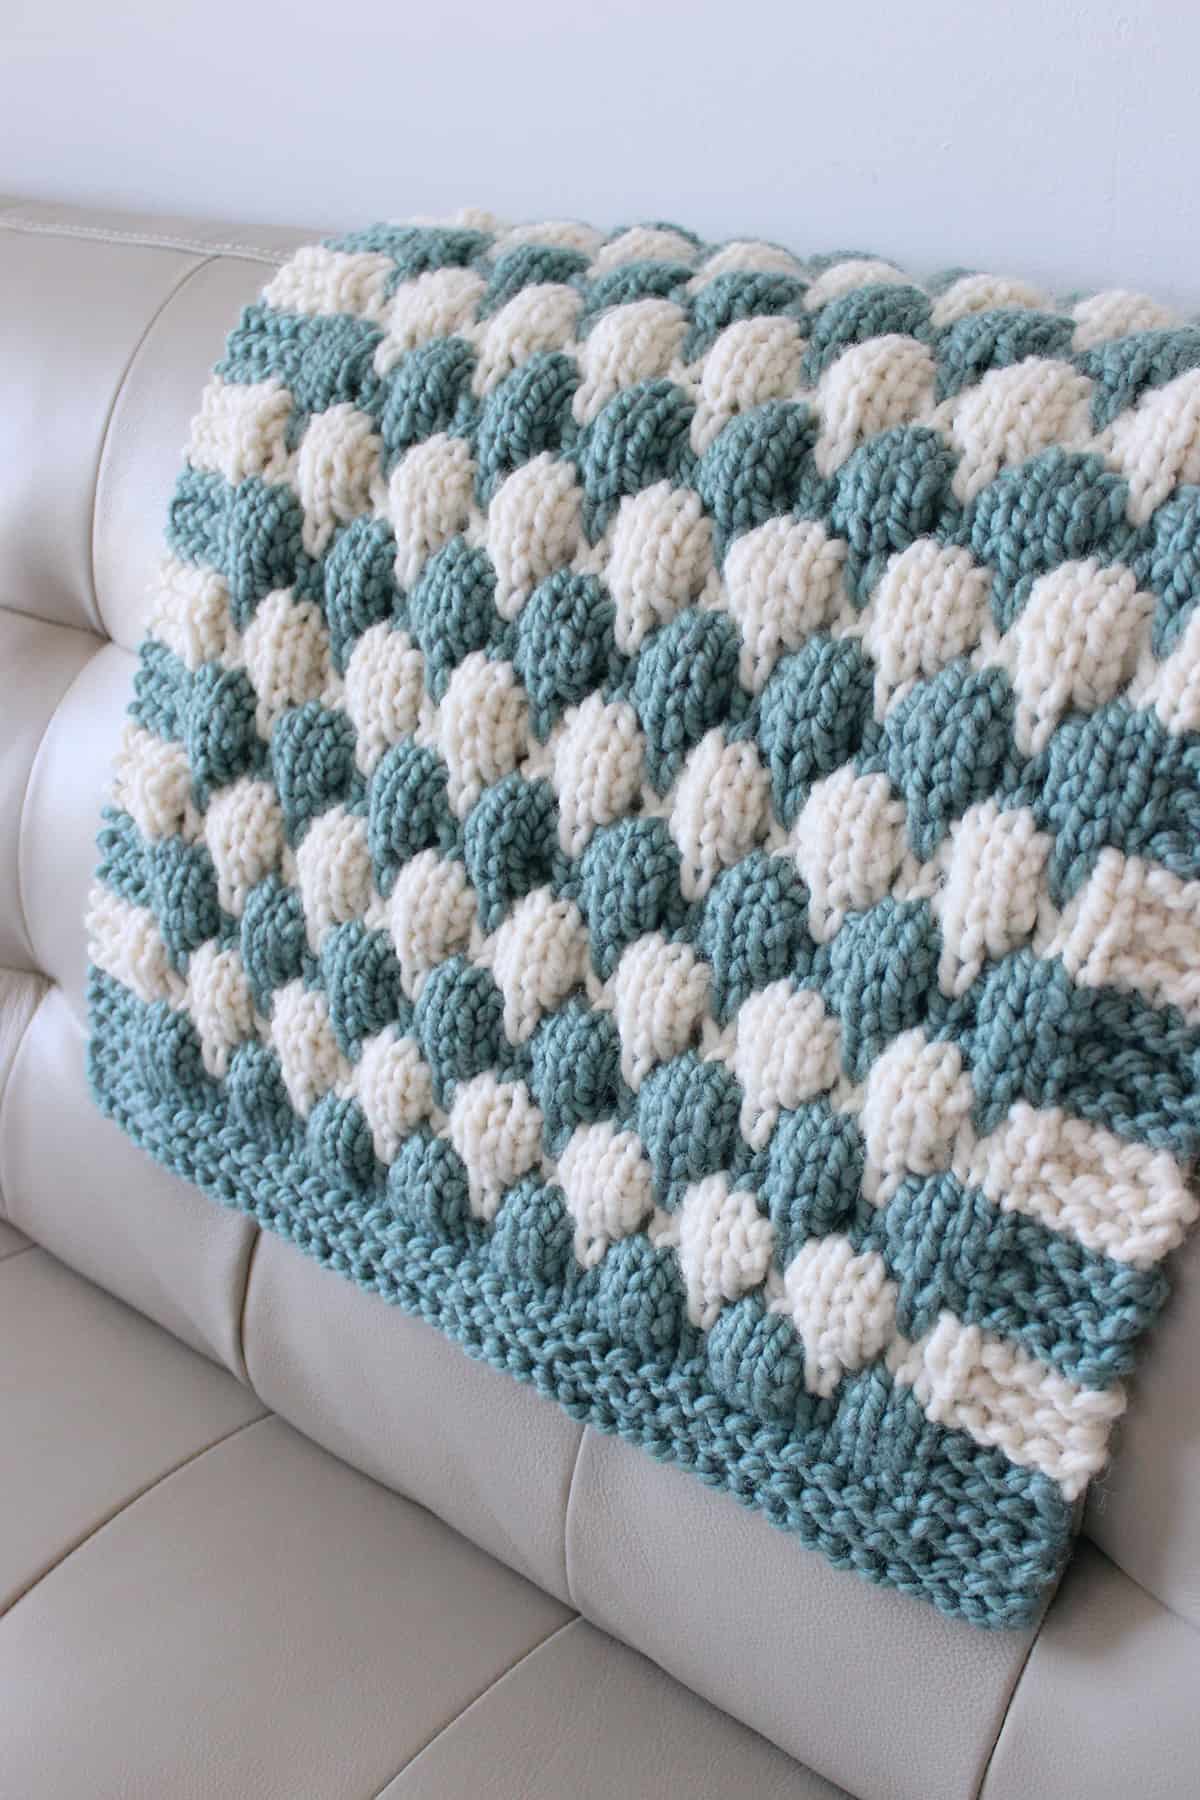 Chunky baby blanket in blue and white yarn colors on couch.